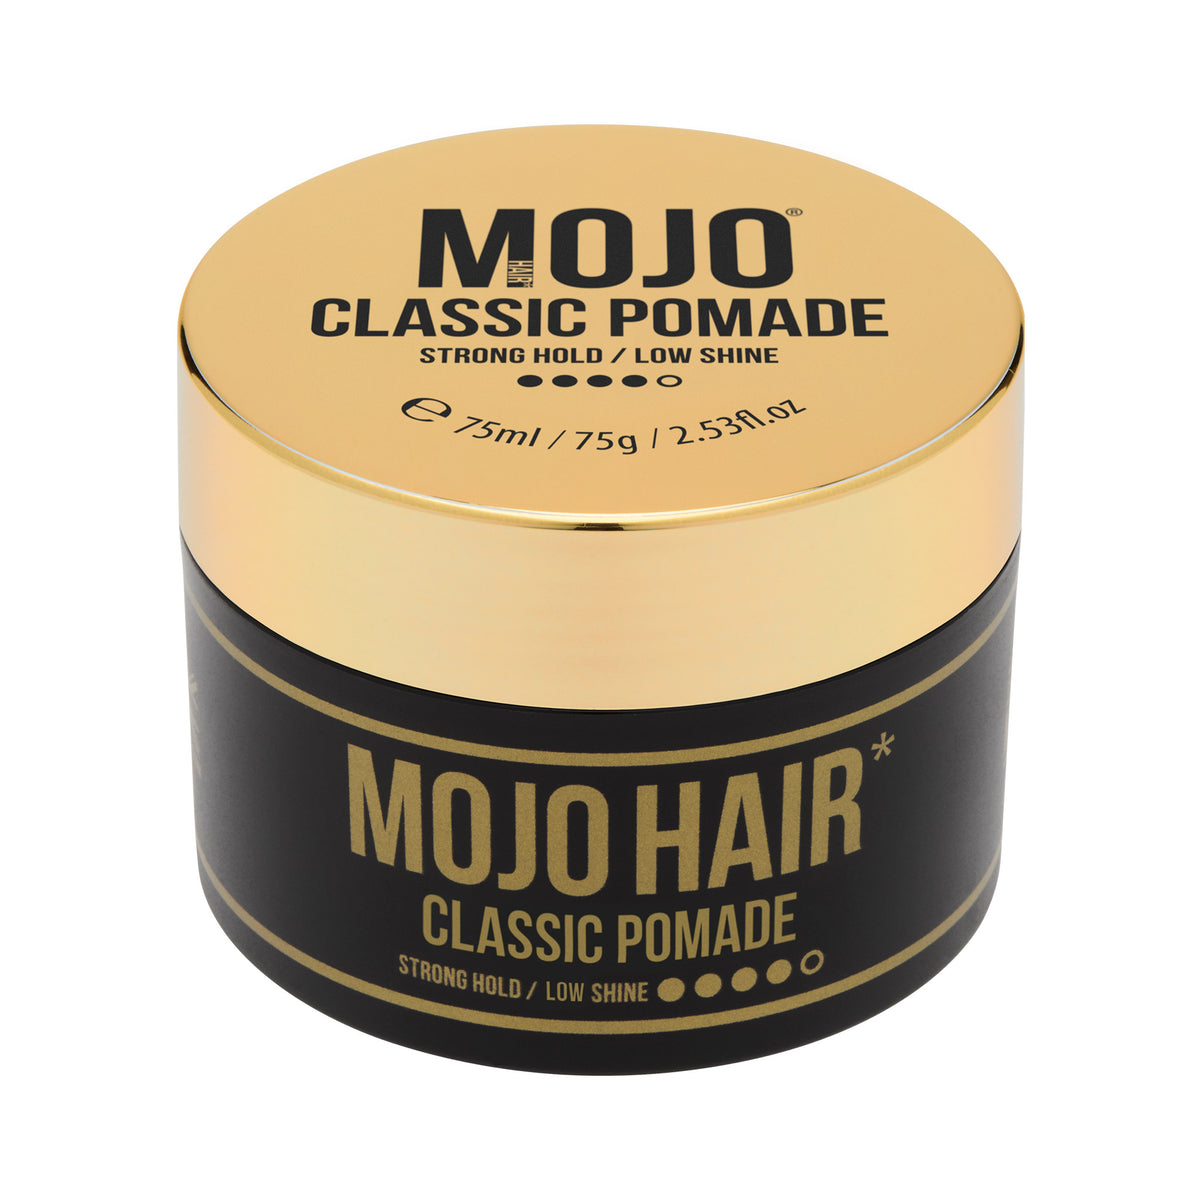 Mojo Hair Classic Pomade full pack shot photograph of black and gold tub with lid on features our best selling product benefits Strong Hold /Low Shine water based pomade 75ml features styling retro twist deign luxury fragrance Washes out with ease great hairstyling product for men and women  (75ml / 75g / 2.53fl.oz) 